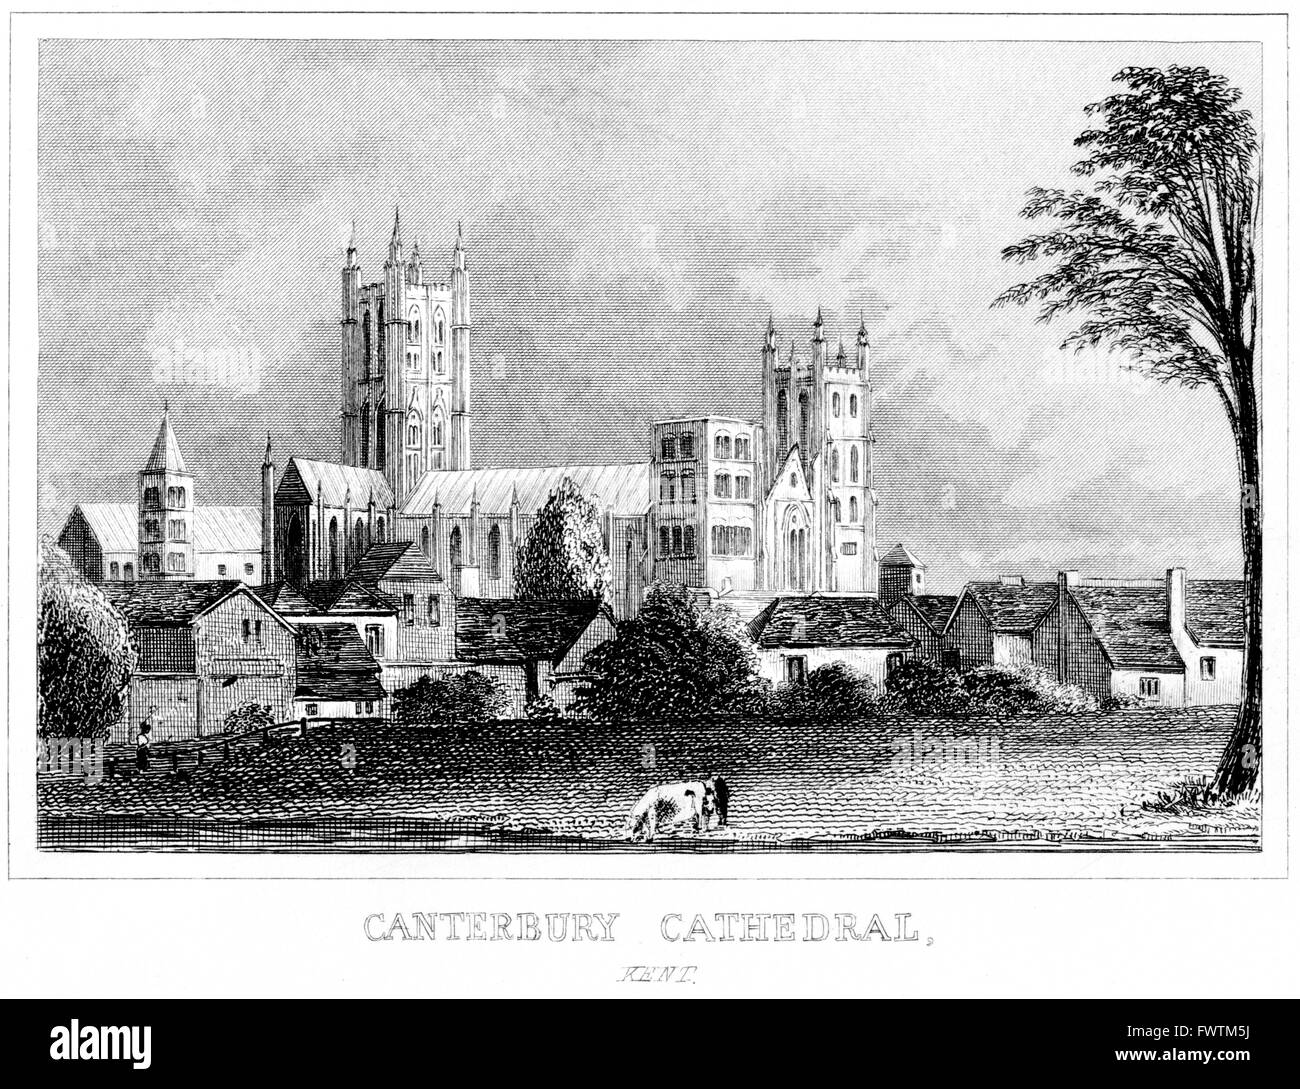 An engraving of Canterbury Cathedral, Kent scanned at high resolution from a book printed around 1845. Believed copyright free. Stock Photo